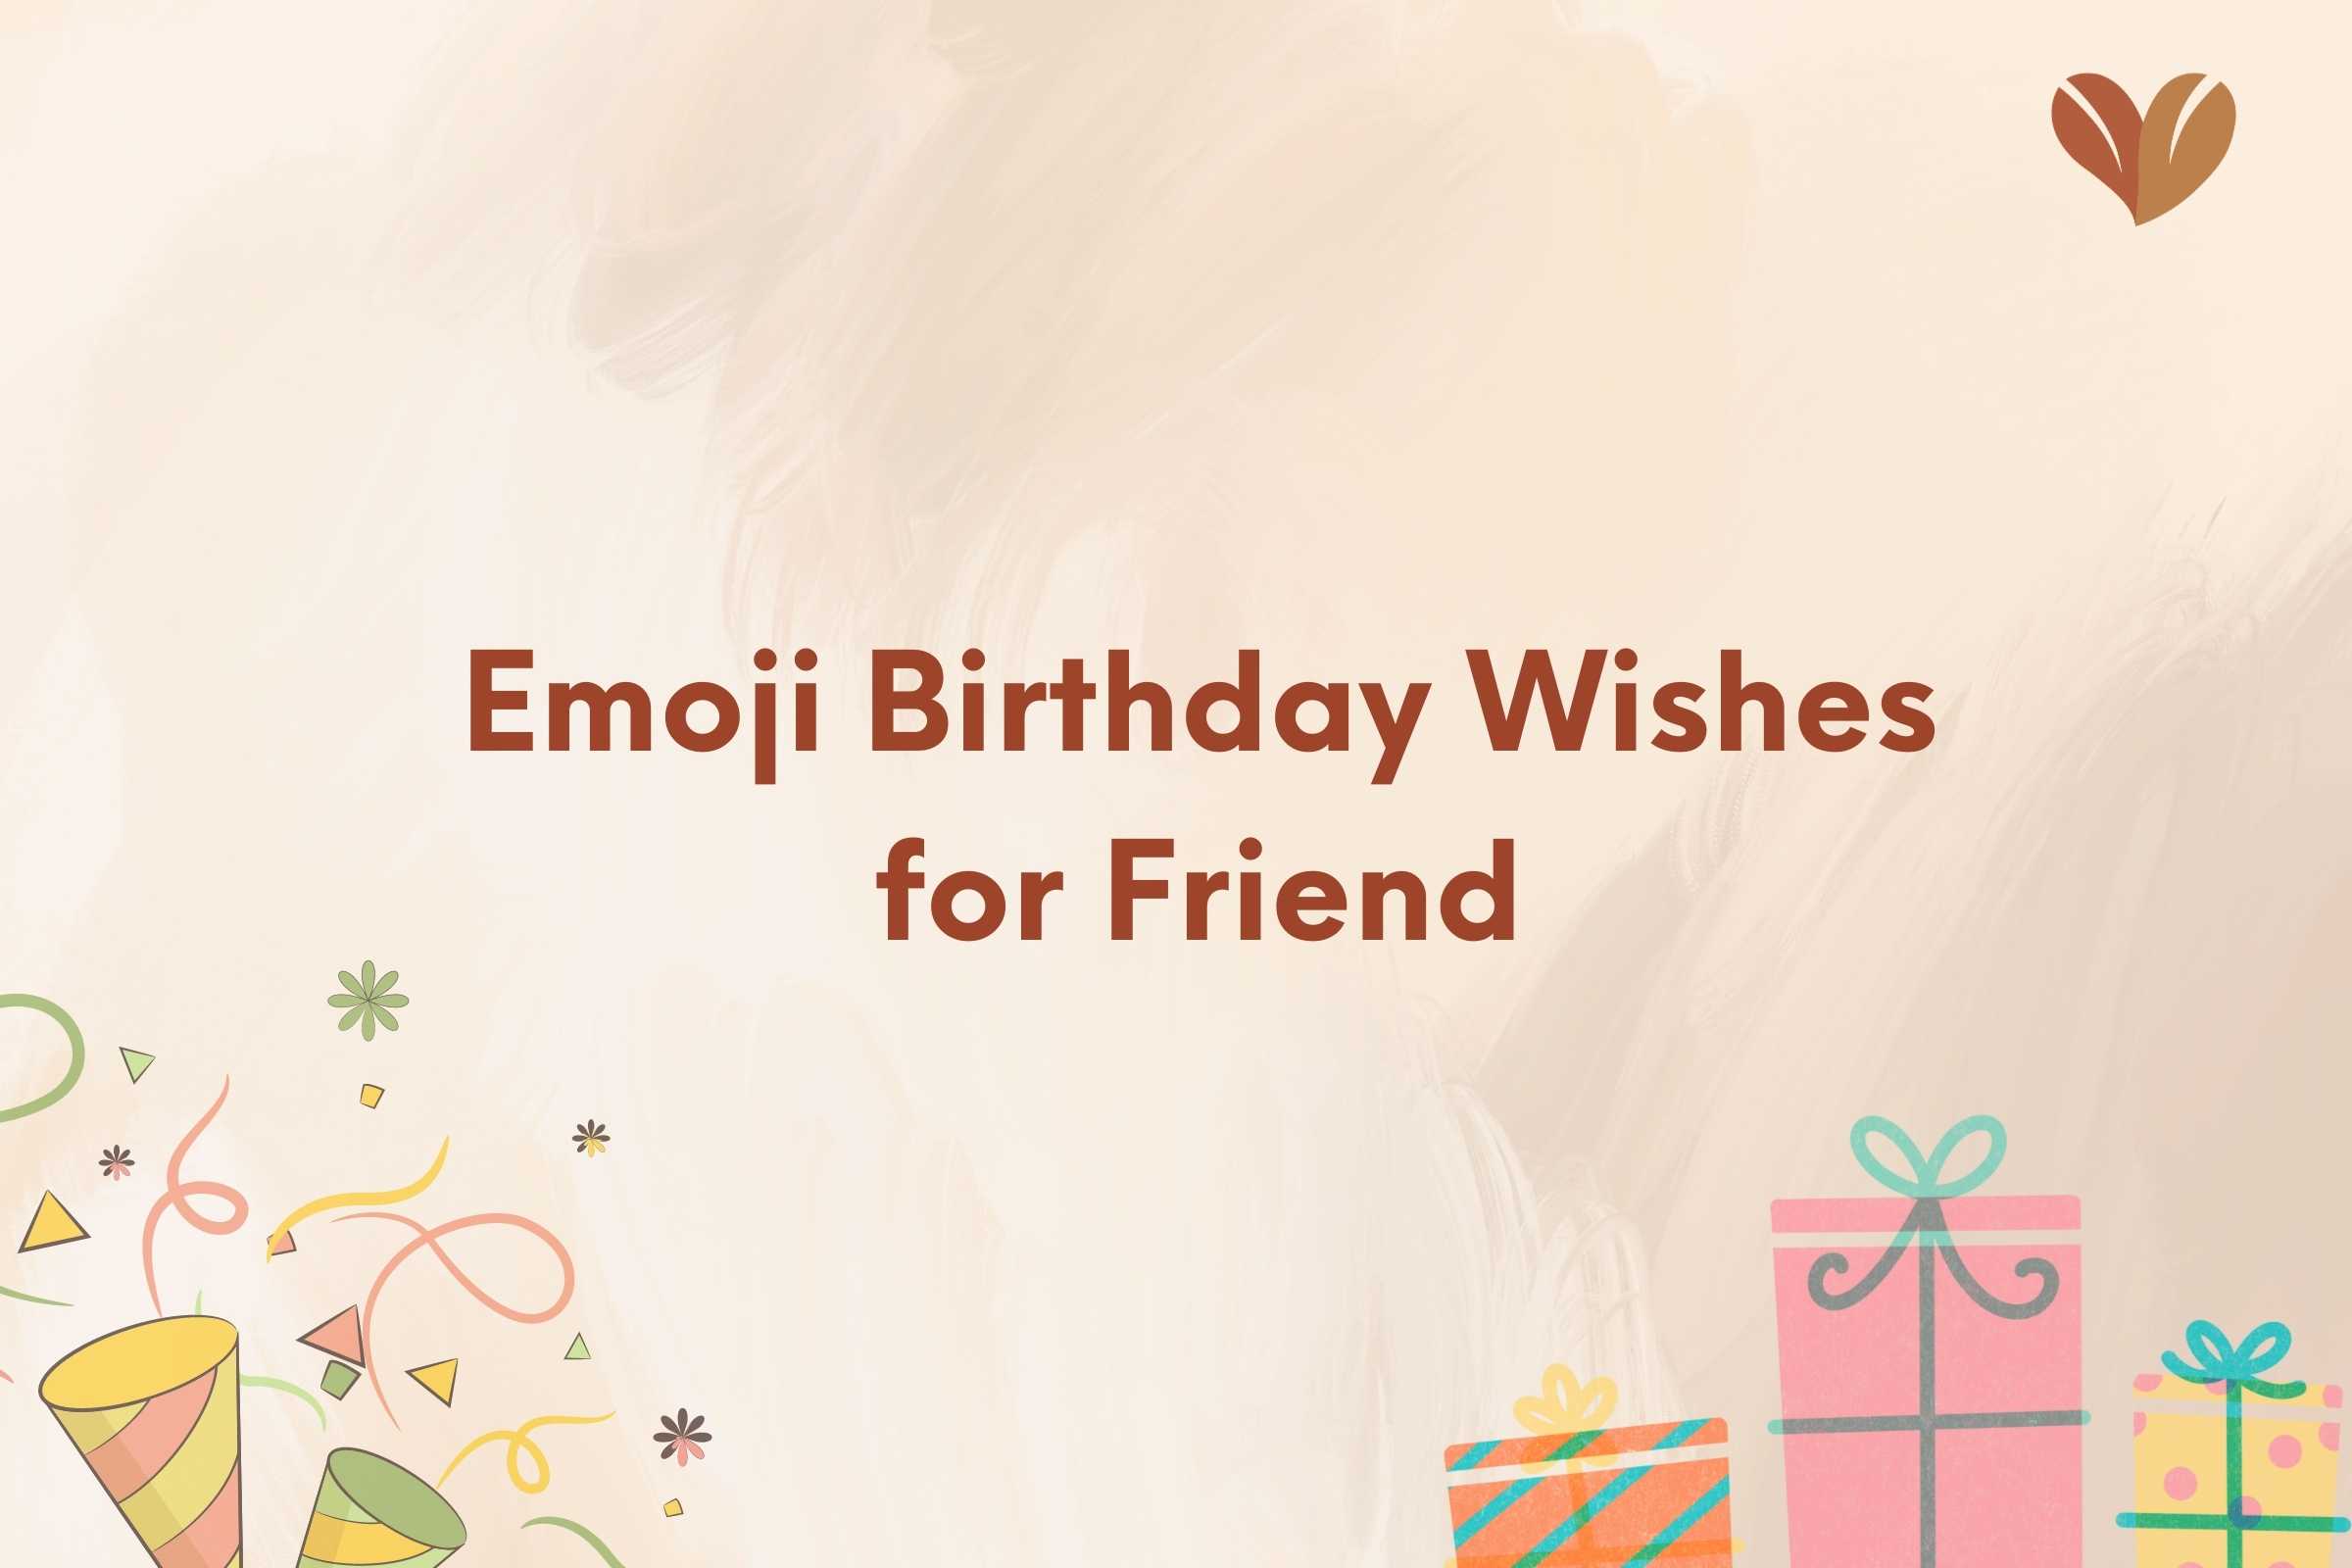 Capturing the spirit of friendship with 'birthday wishes for friend,' a day of shared love.